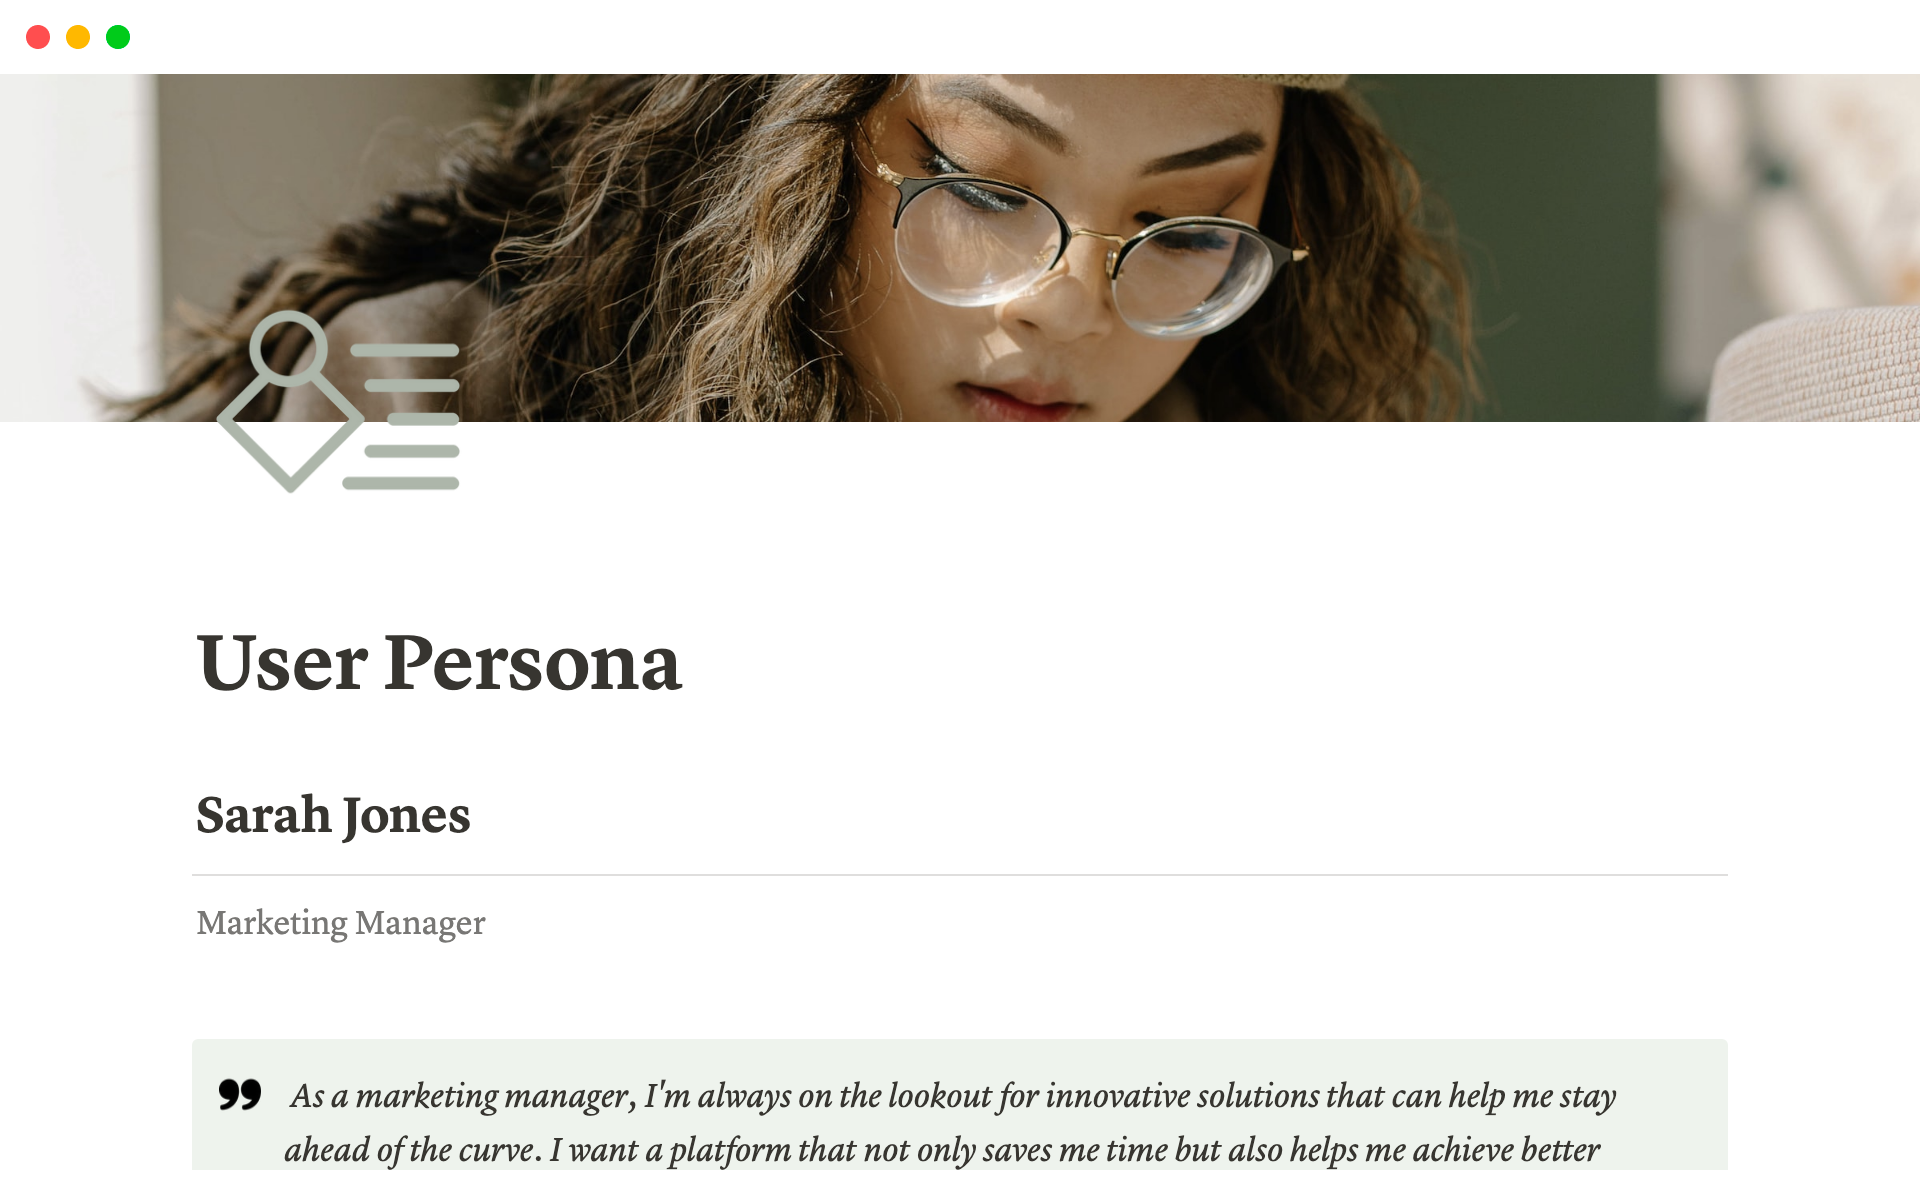 A user persona template can help organize and present data from user research, making it easier for product teams to create effective personas and use them for decision-making.